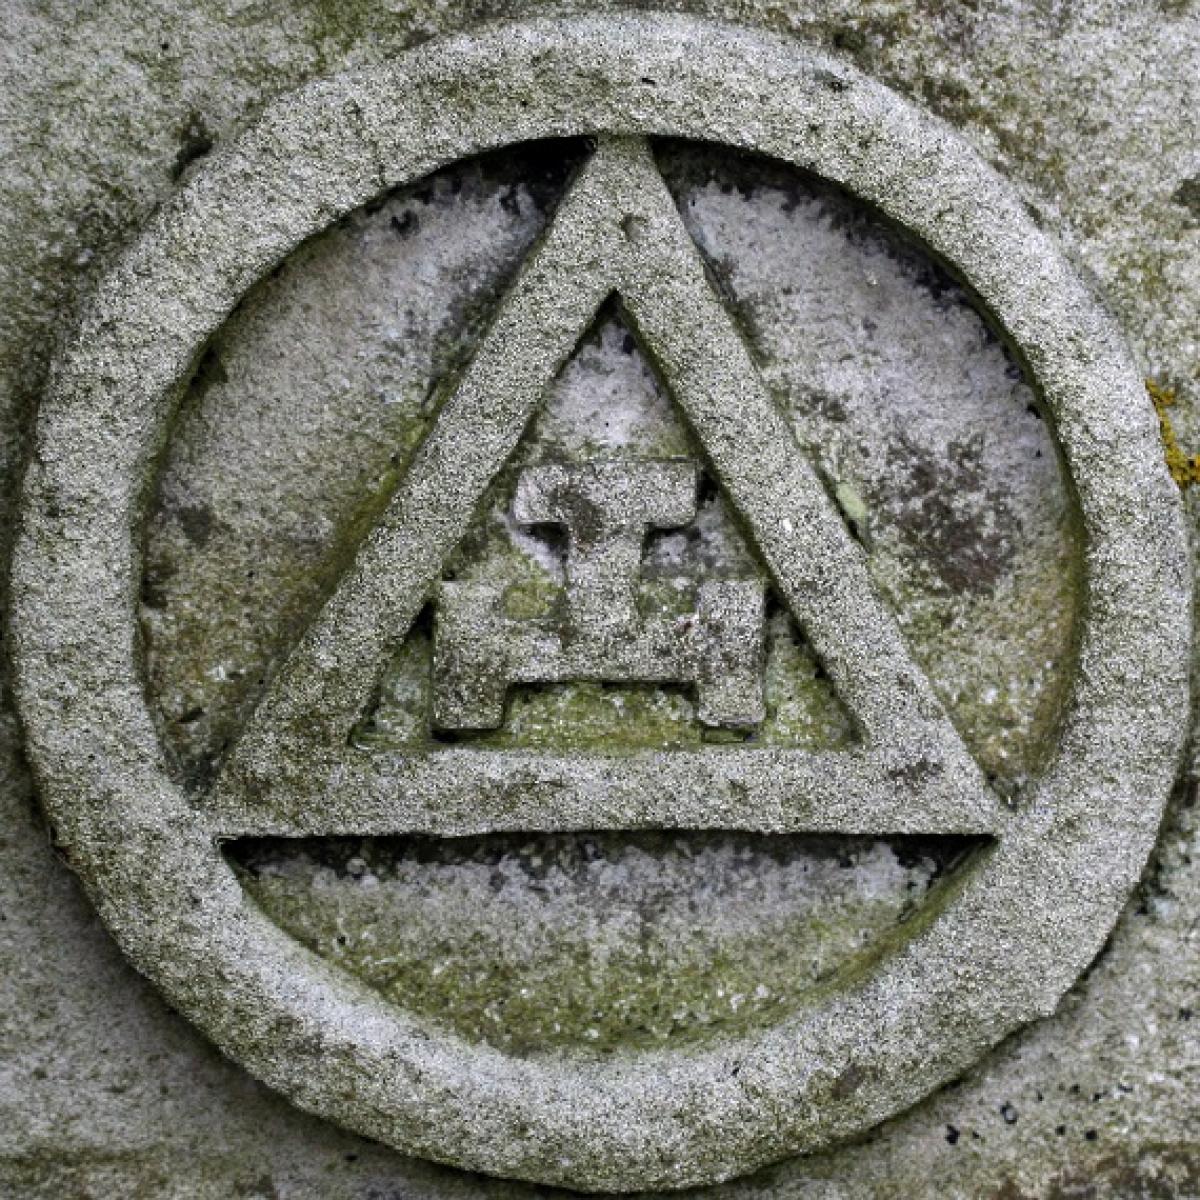 OK, Grove, Headstone Symbols and Meanings, Royal Arch Mason